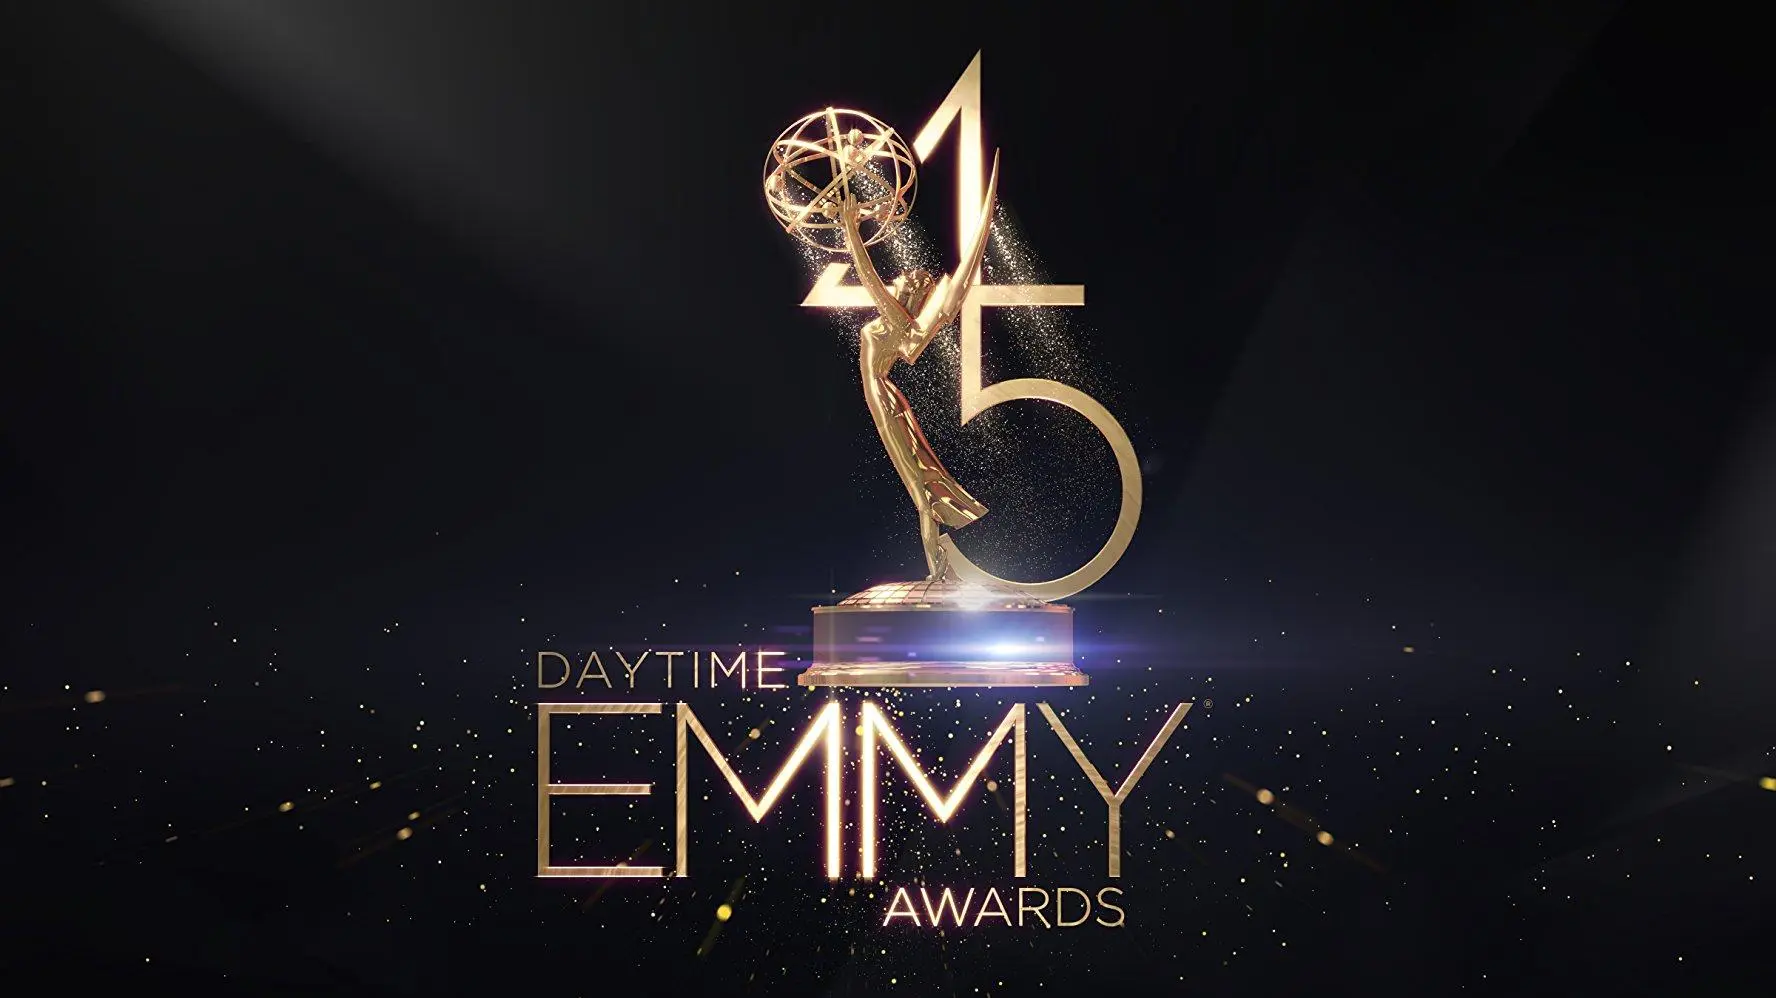 The 45th Annual Daytime Emmy Awards_peliplat